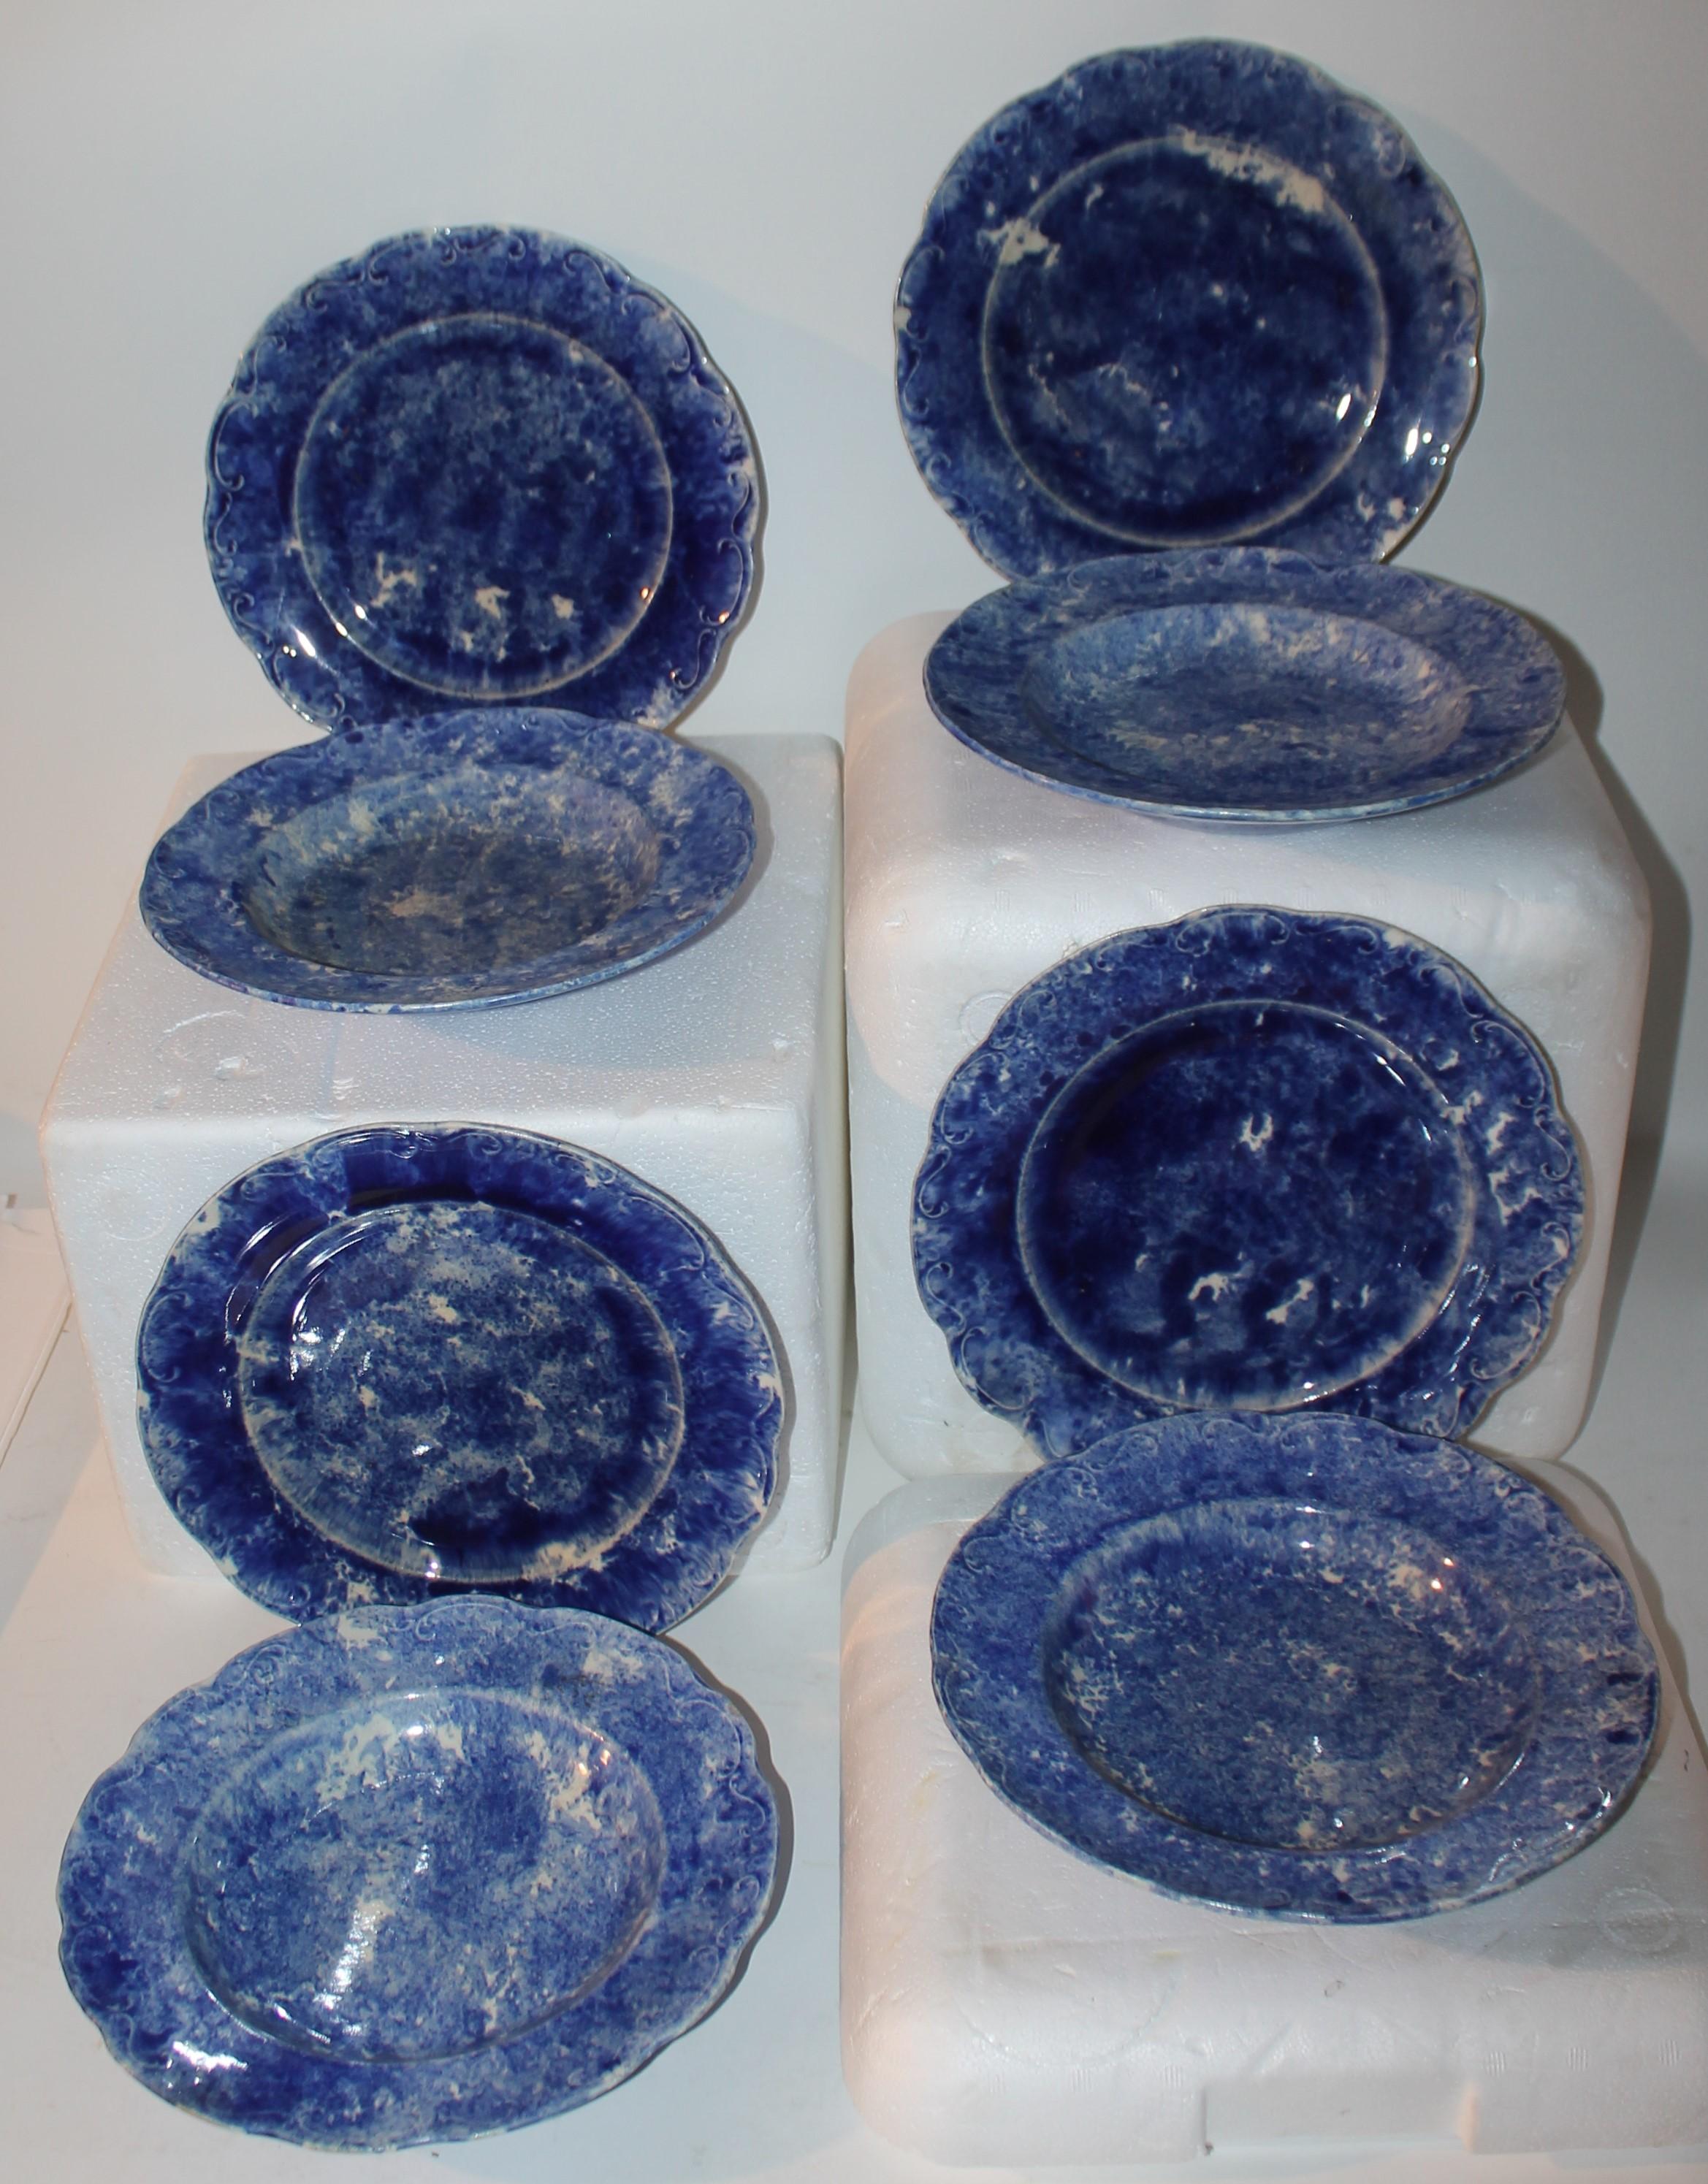 Collection of 19thc Sponge Ware four dinner bowls & four dinner plates in the same pattern. The condition is very good.